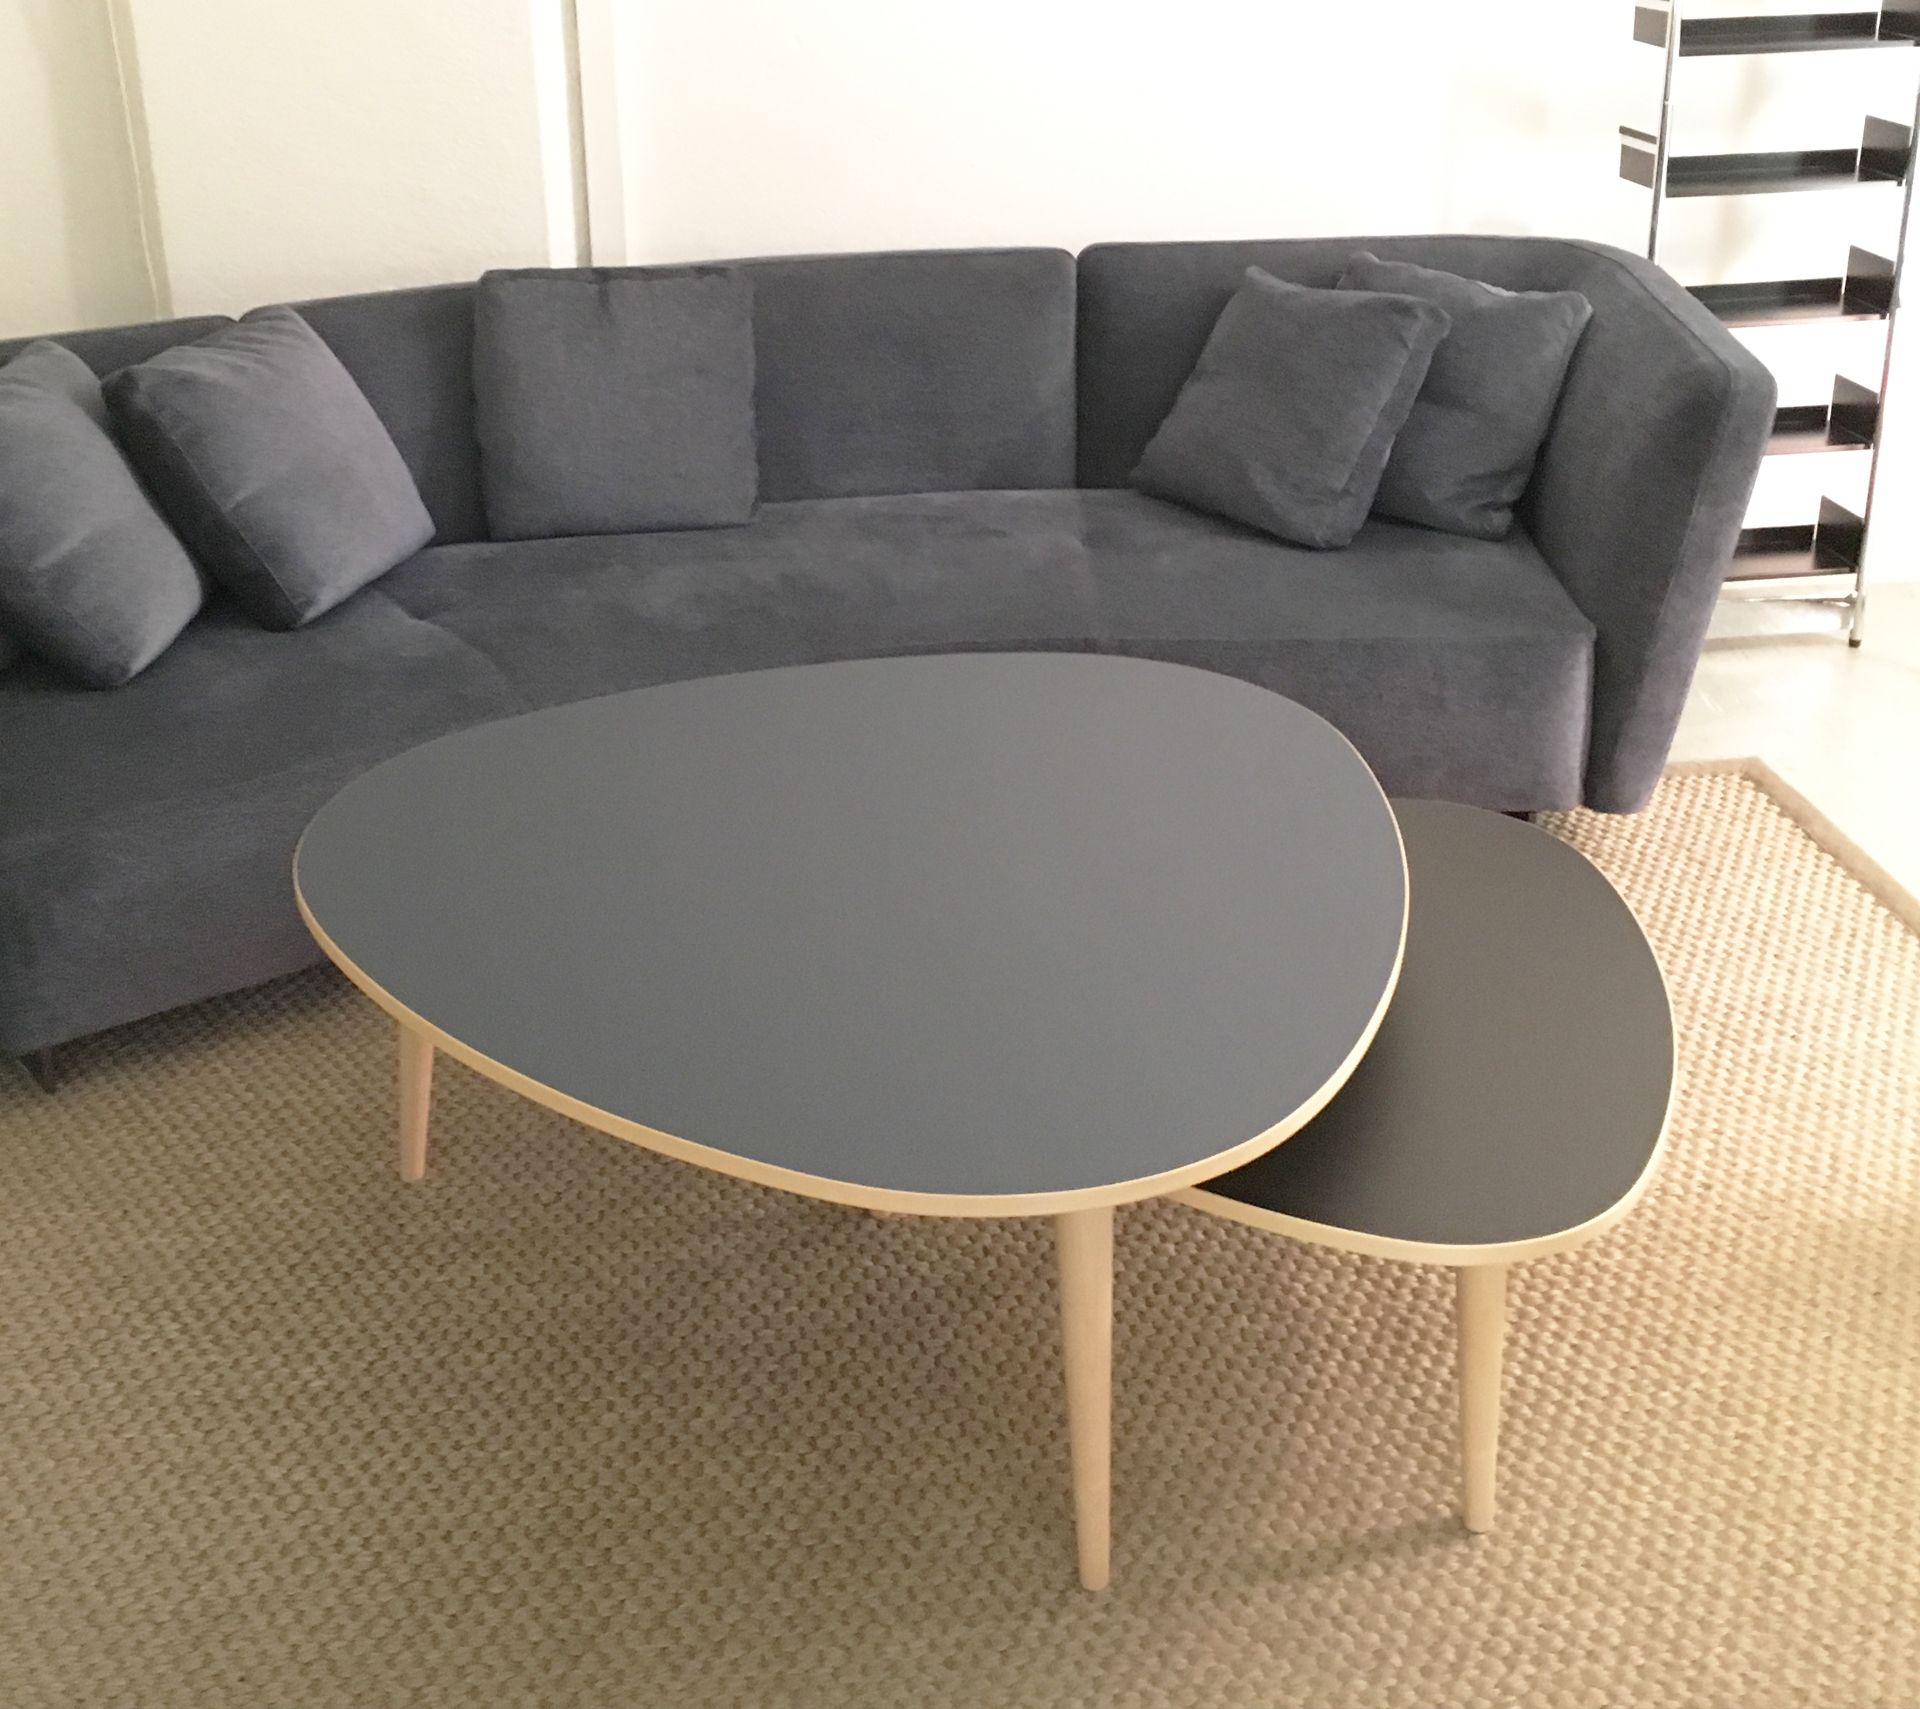 Three-round Table low and small, smokey blue and black